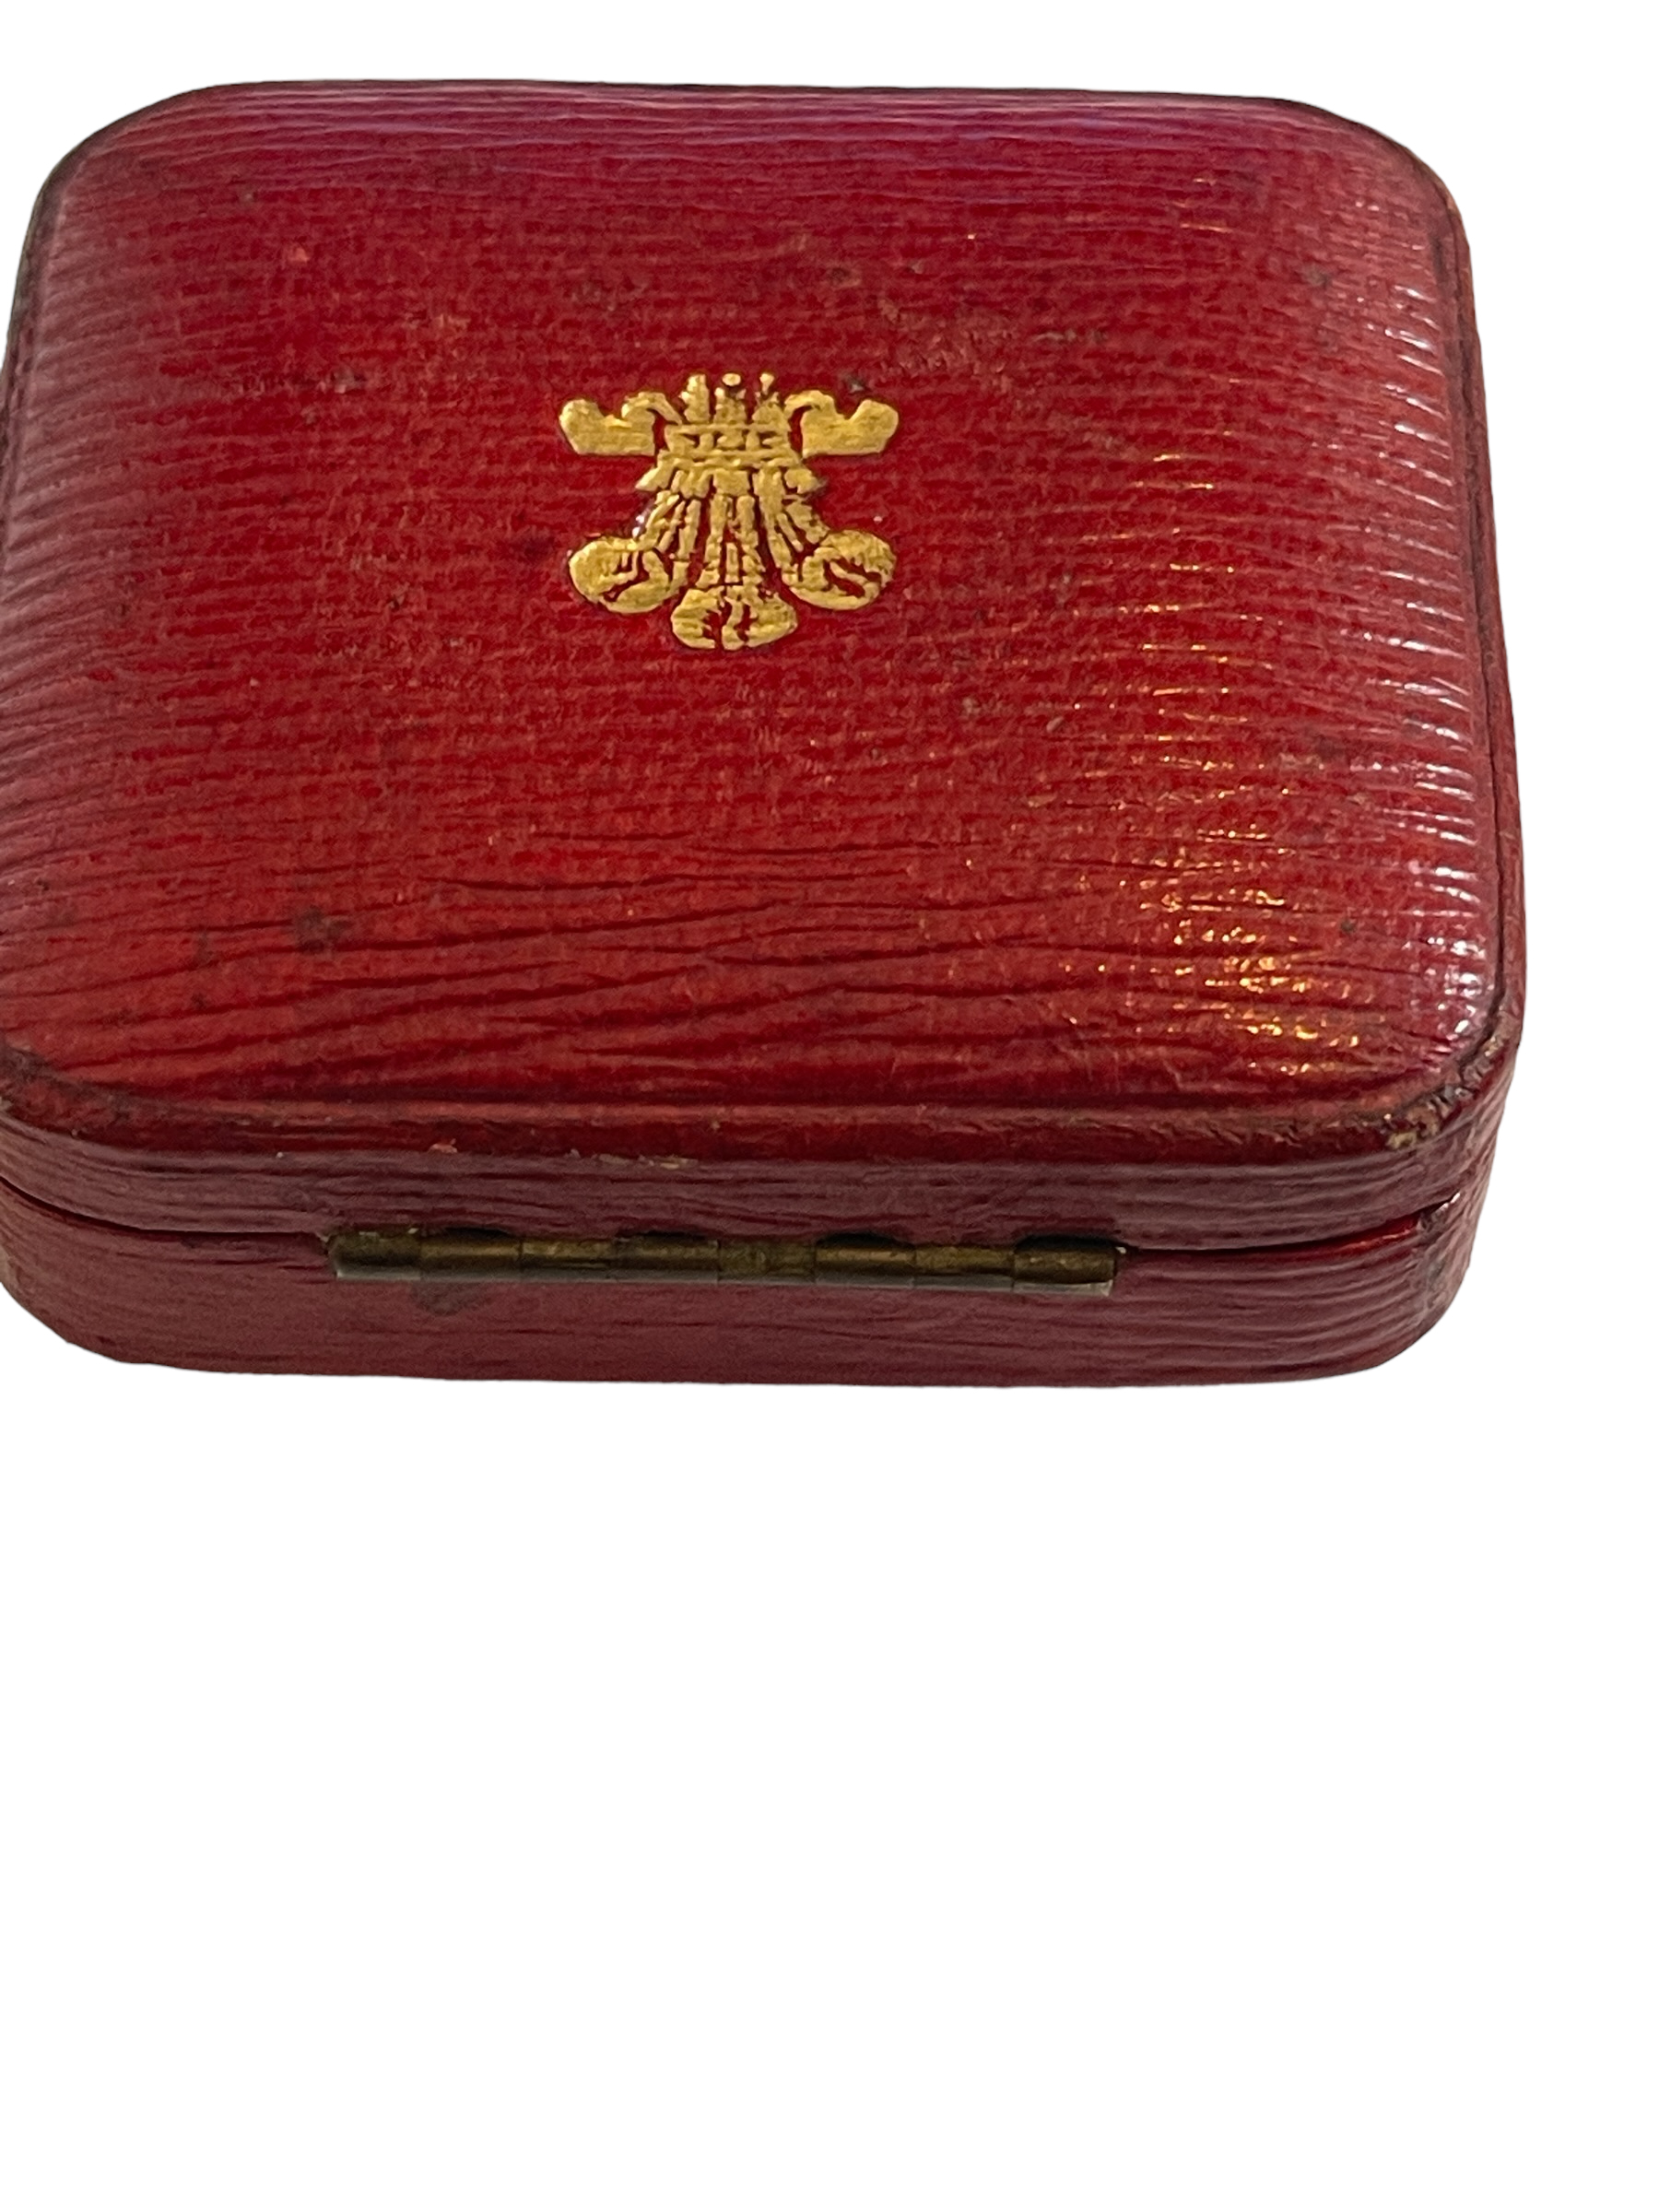 Alfred Clark New Bond St London Prince of Wales Feathers Cypher Boxed Vesta Case. - Image 12 of 13